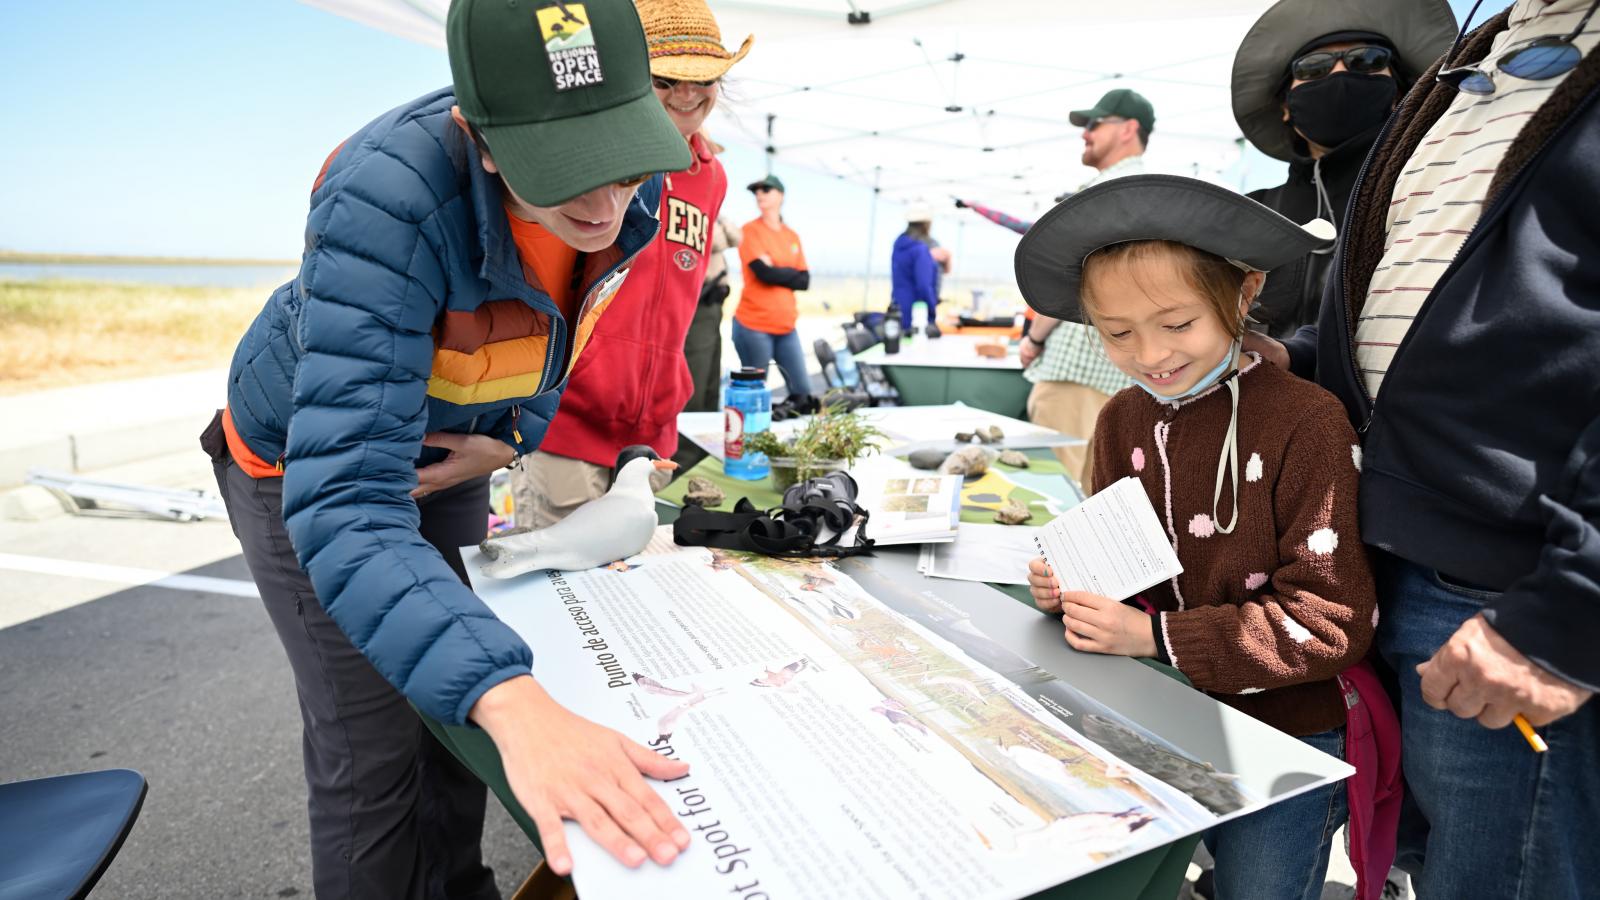 Midpeninsula Regional Open Space District biologist Karine Tokatlian helped visitors to Midpen's Ravenswood Open Space Preserve connect with nature during the Bayside Family Festival April 30. (Leo Leung)